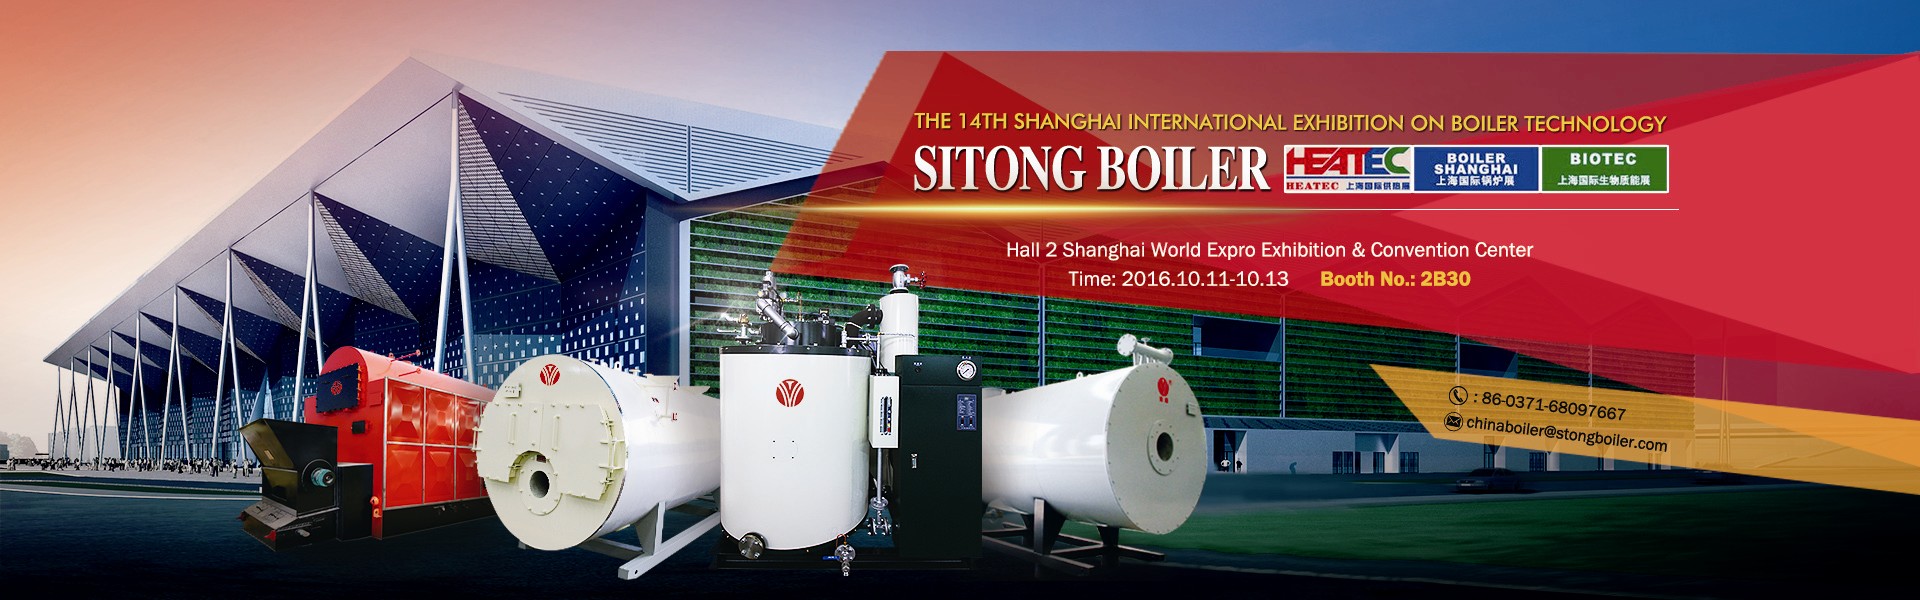 Sitong Boiler Invited You to the 2016 Shanghai Boiler Exhibition on Technology